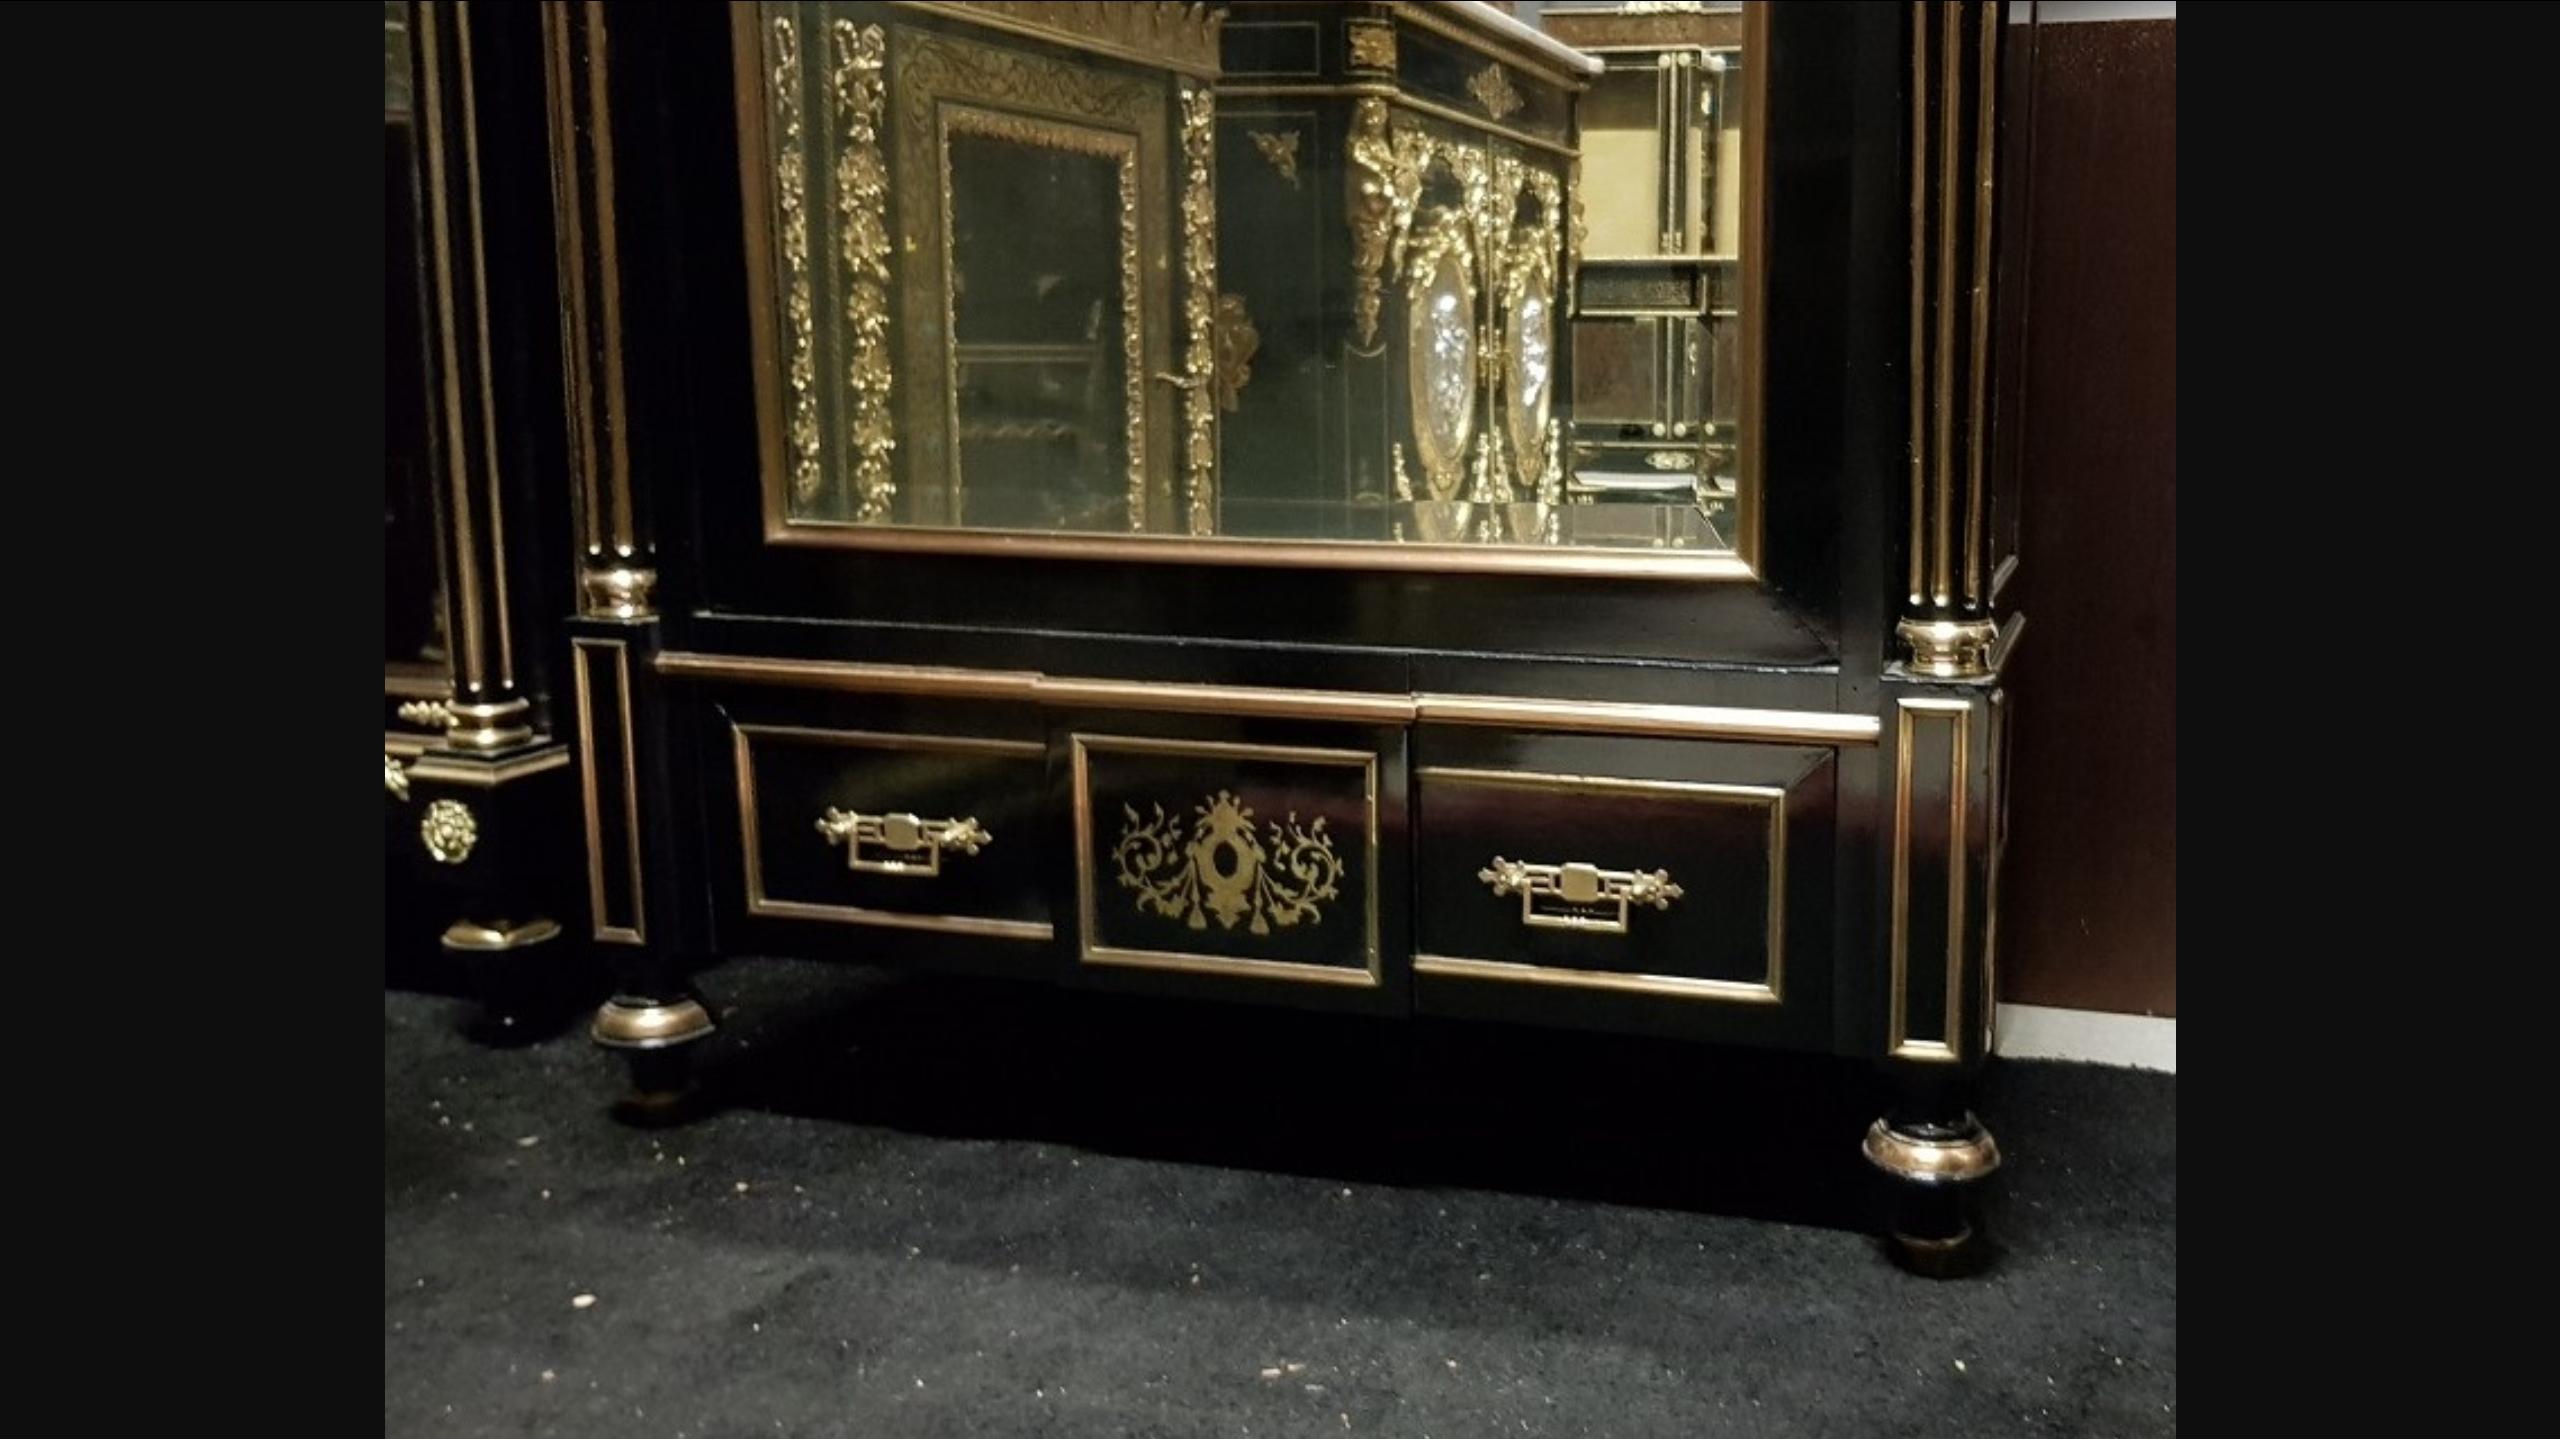 Beautiful Napoleon III Boulle bonnetière, cupboard or wardrobe. Columns detached and rudentées adorned with brass grooves, Boulle marquetry in brass motive scrolls and foliage on the upper part. Ornamentation of gilt bronzes with galleries of